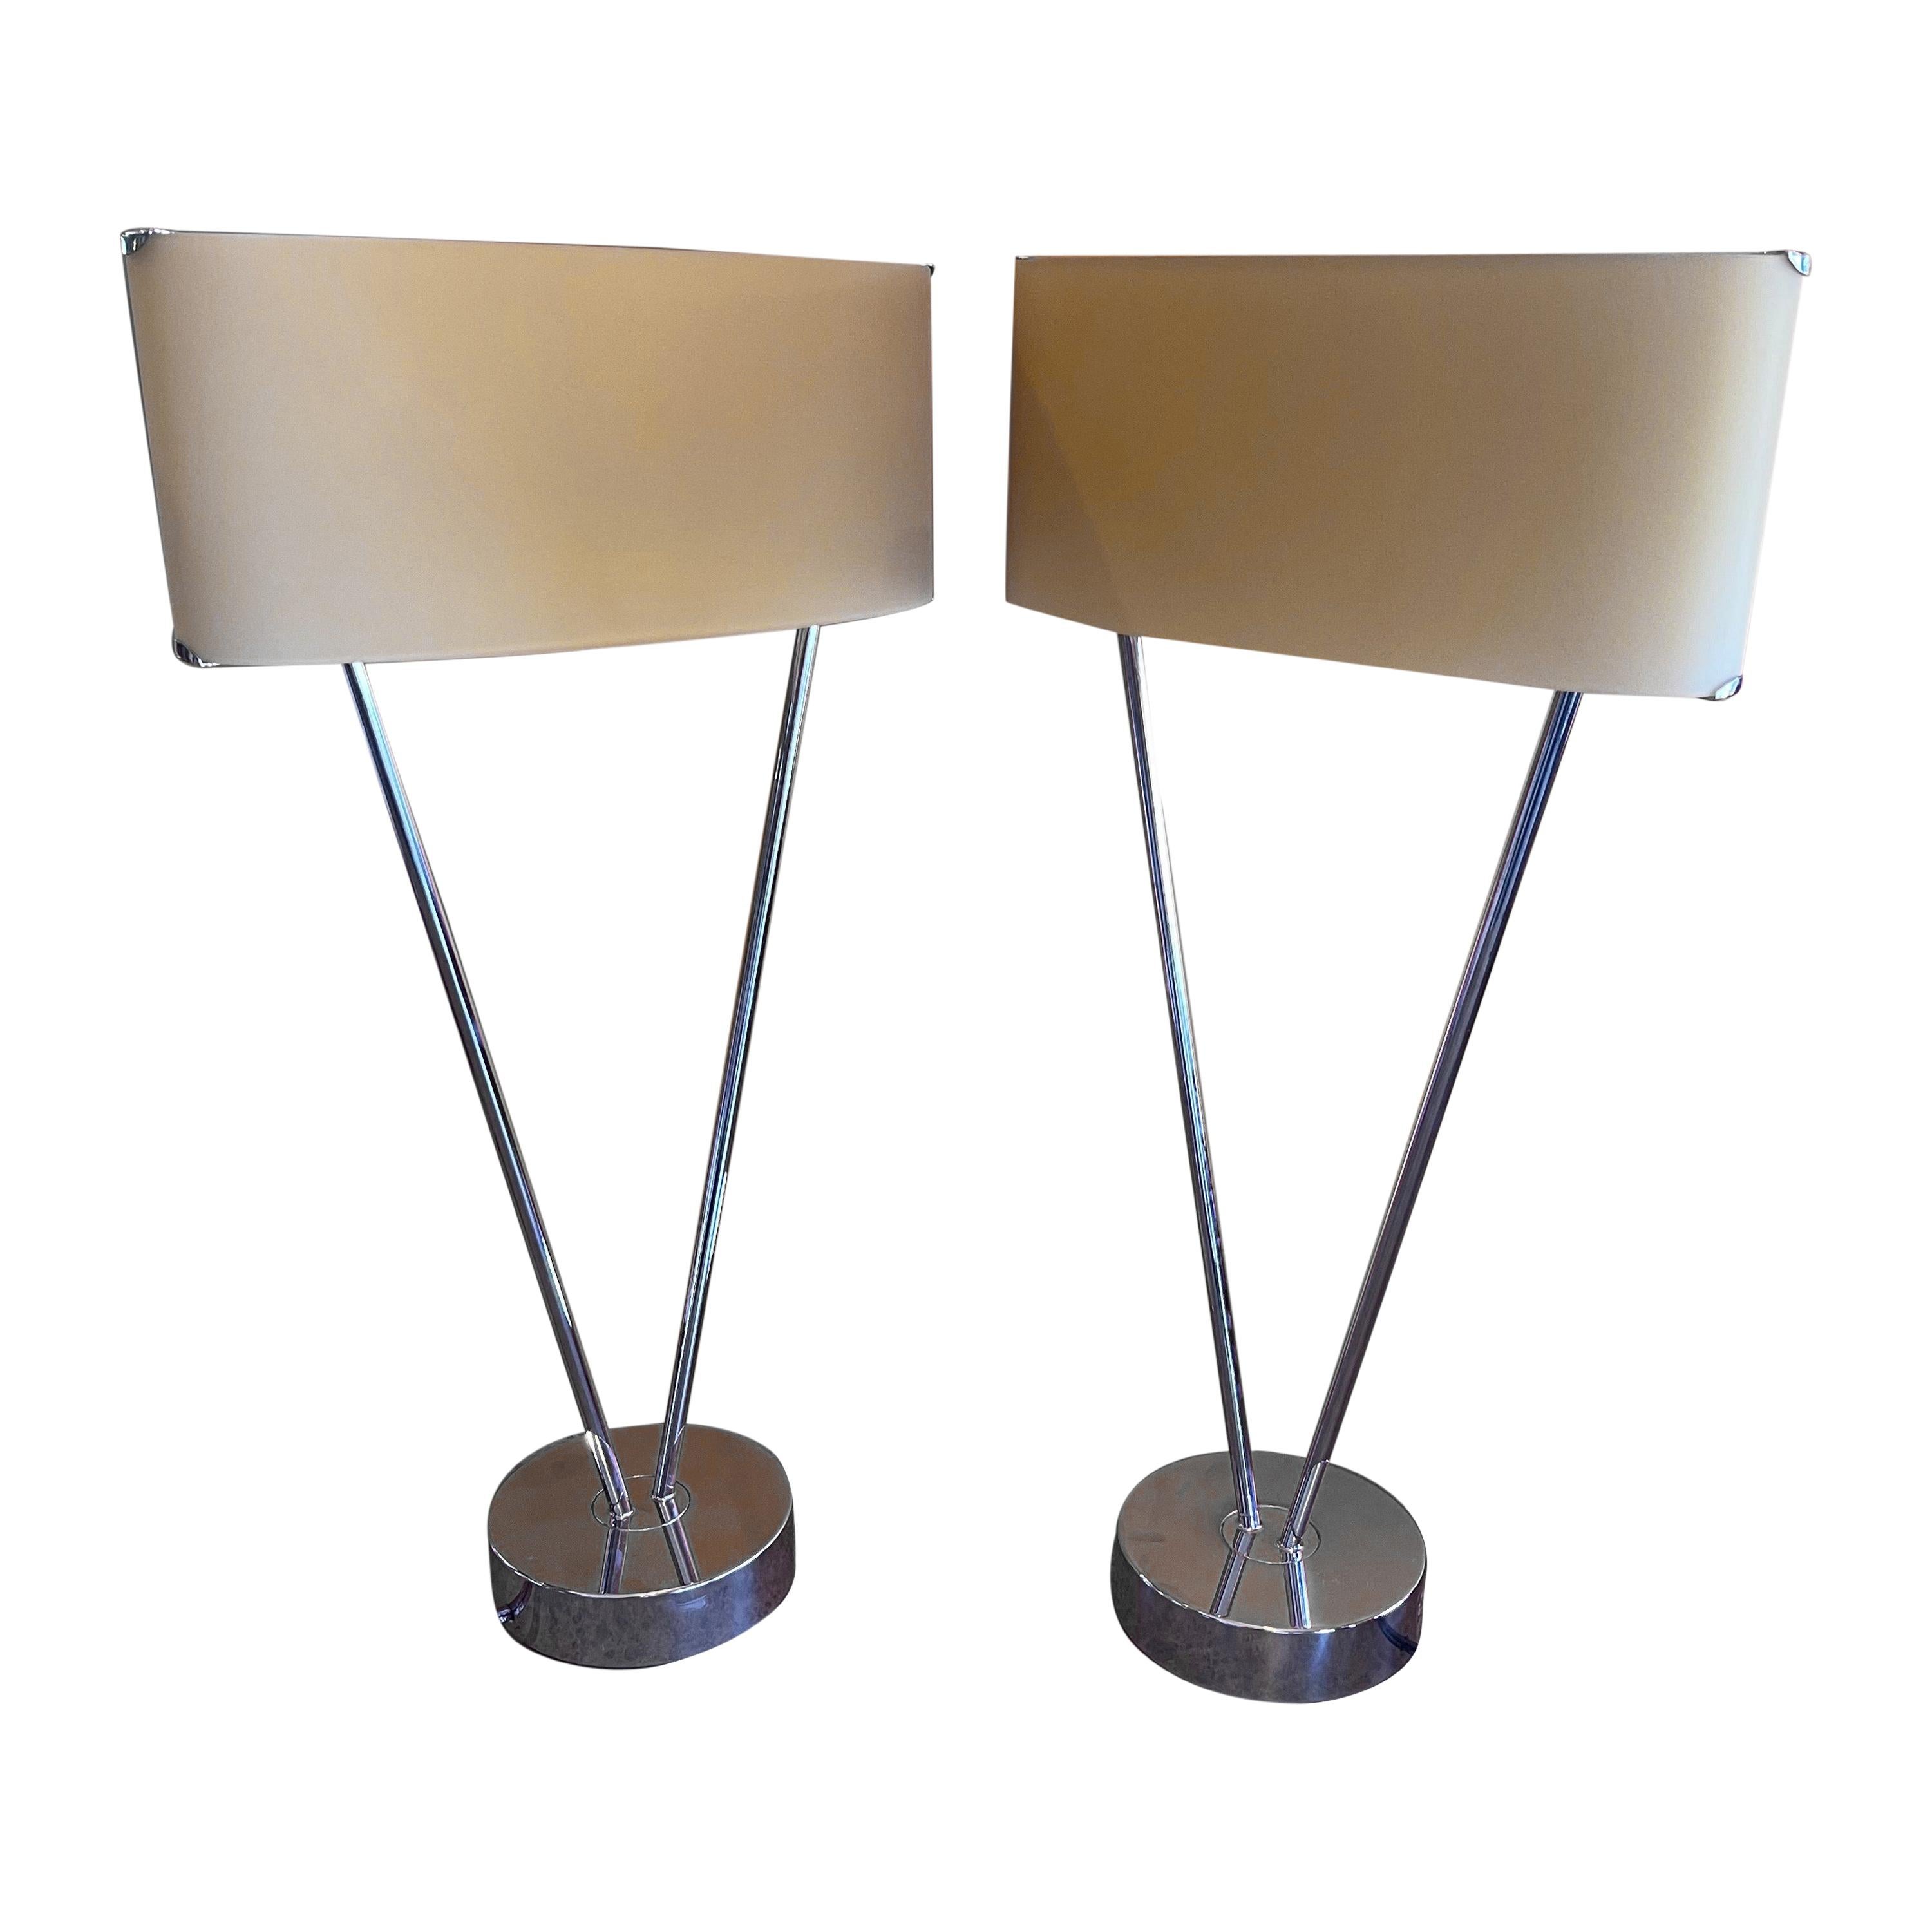 Pair of Minimalist "Vittoria" Chrome Table Lamps by Leucos